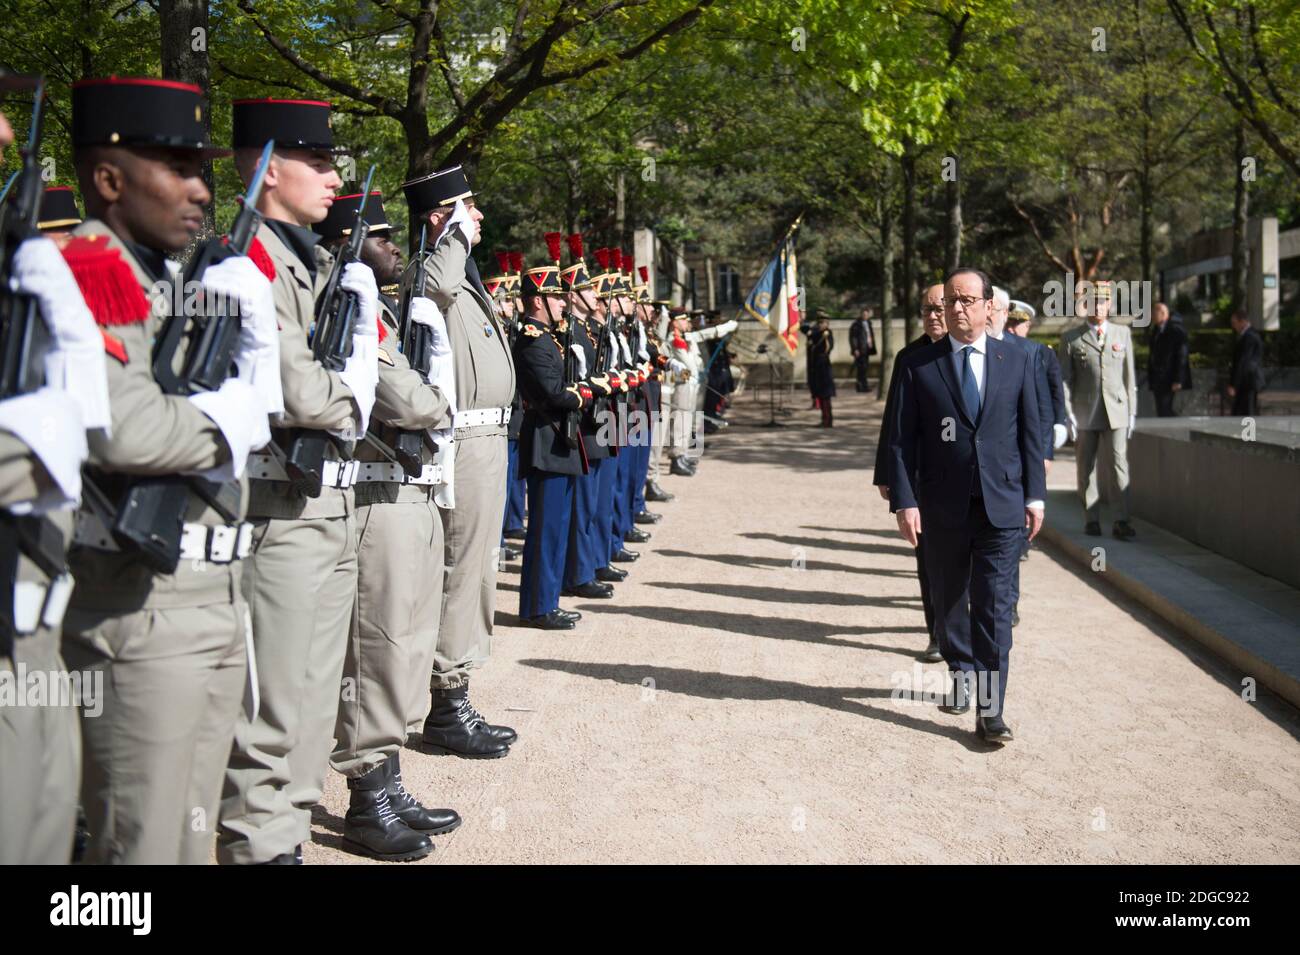 French President Francois Hollande inaugurates a memorial in honor of French soldiers killed in foreign military operations (OPEX), at Parc Andre Citroen in Paris, France on April 18, 2017. Photo by Eliot Blondet/ABACARESS.COM Stock Photo